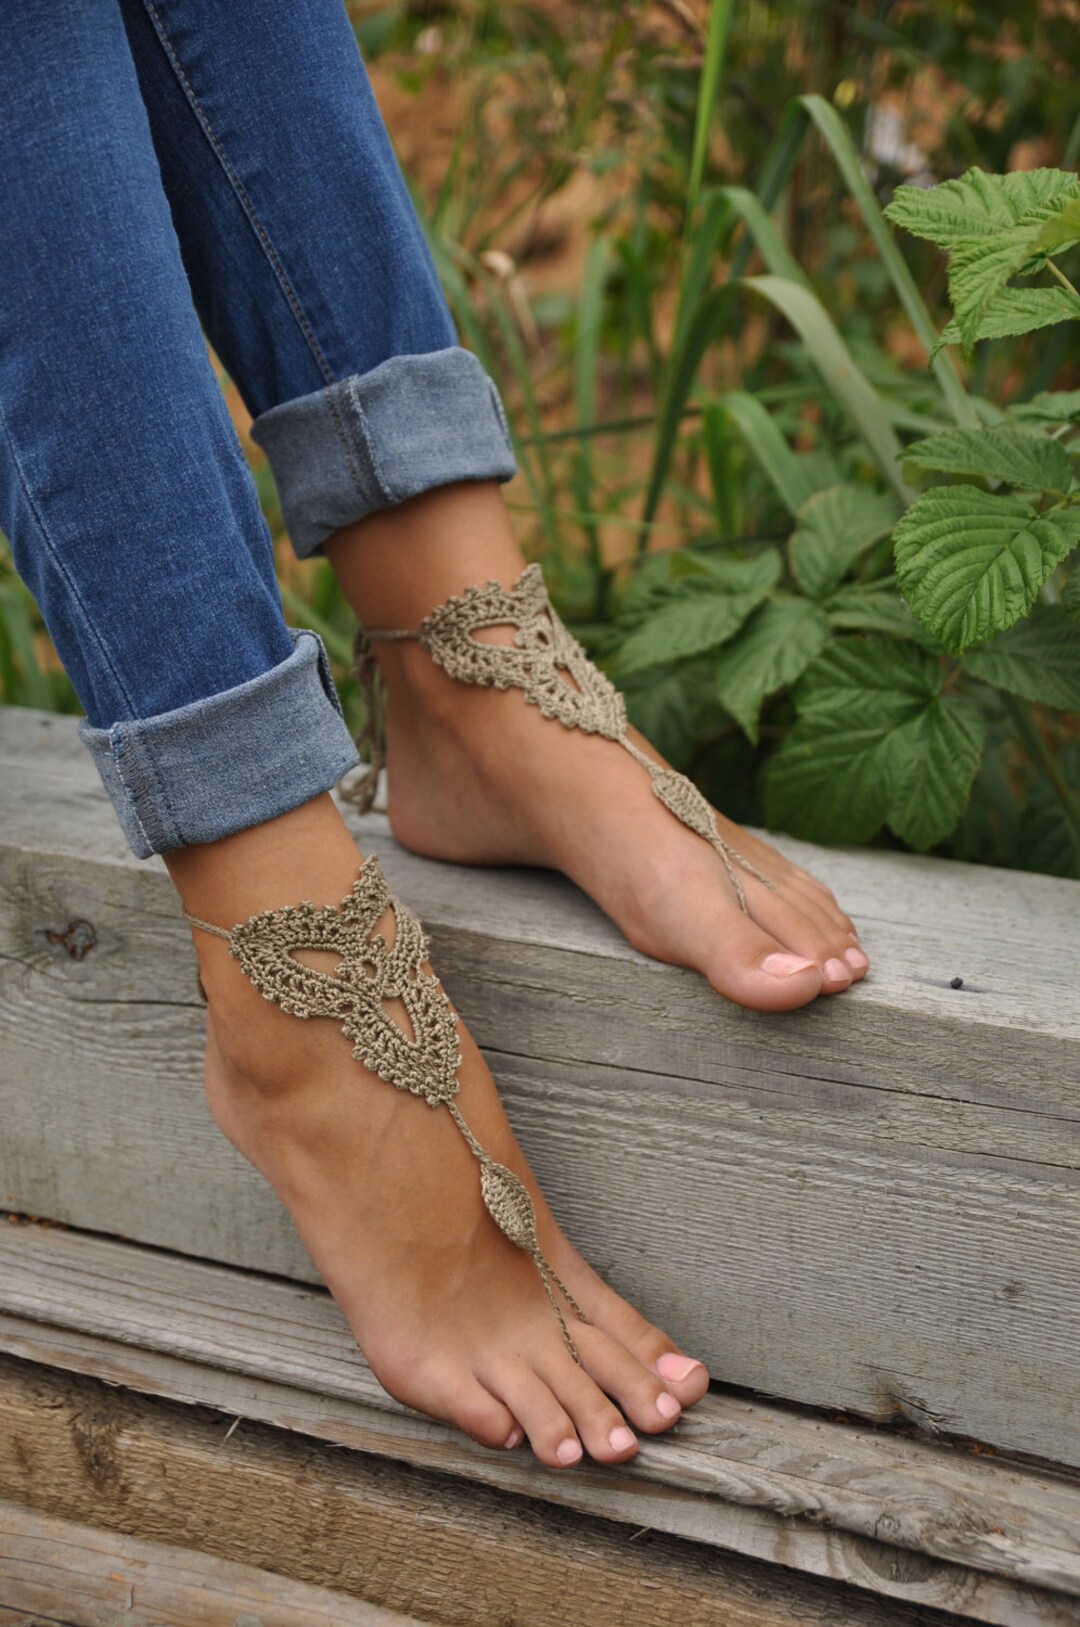 Crochet Tan Barefoot Sandals Taupe Nude Shoes Foot Jewelry - Etsy